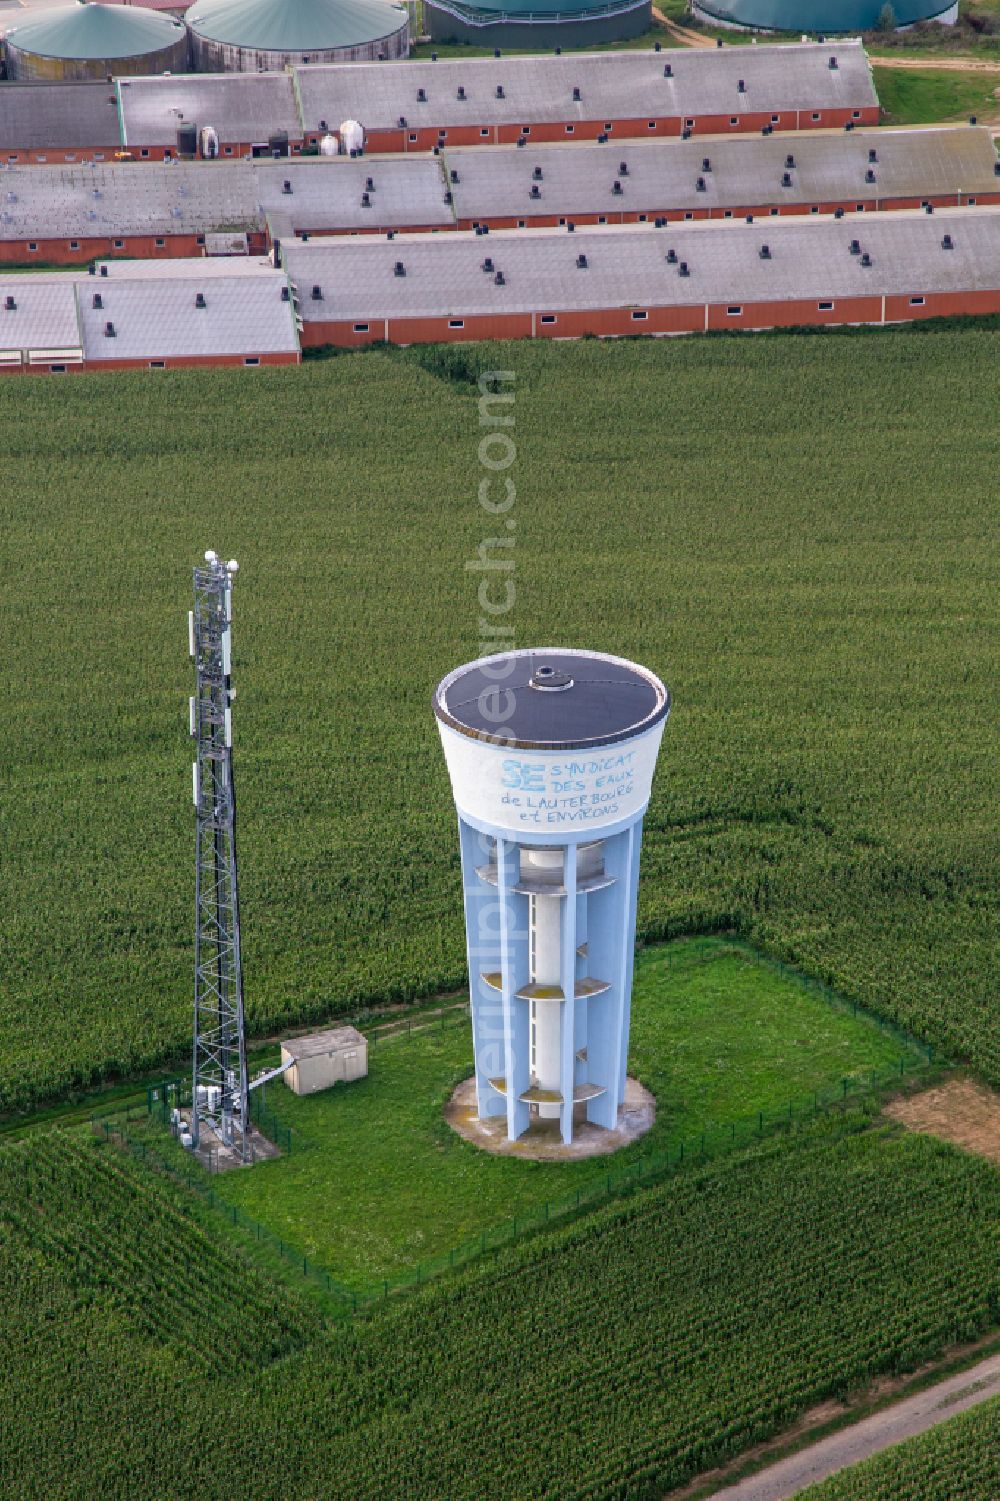 Wintzenbach from the bird's eye view: Building of water tower and mobile phone tower in Wintzenbach in Grand Est, France